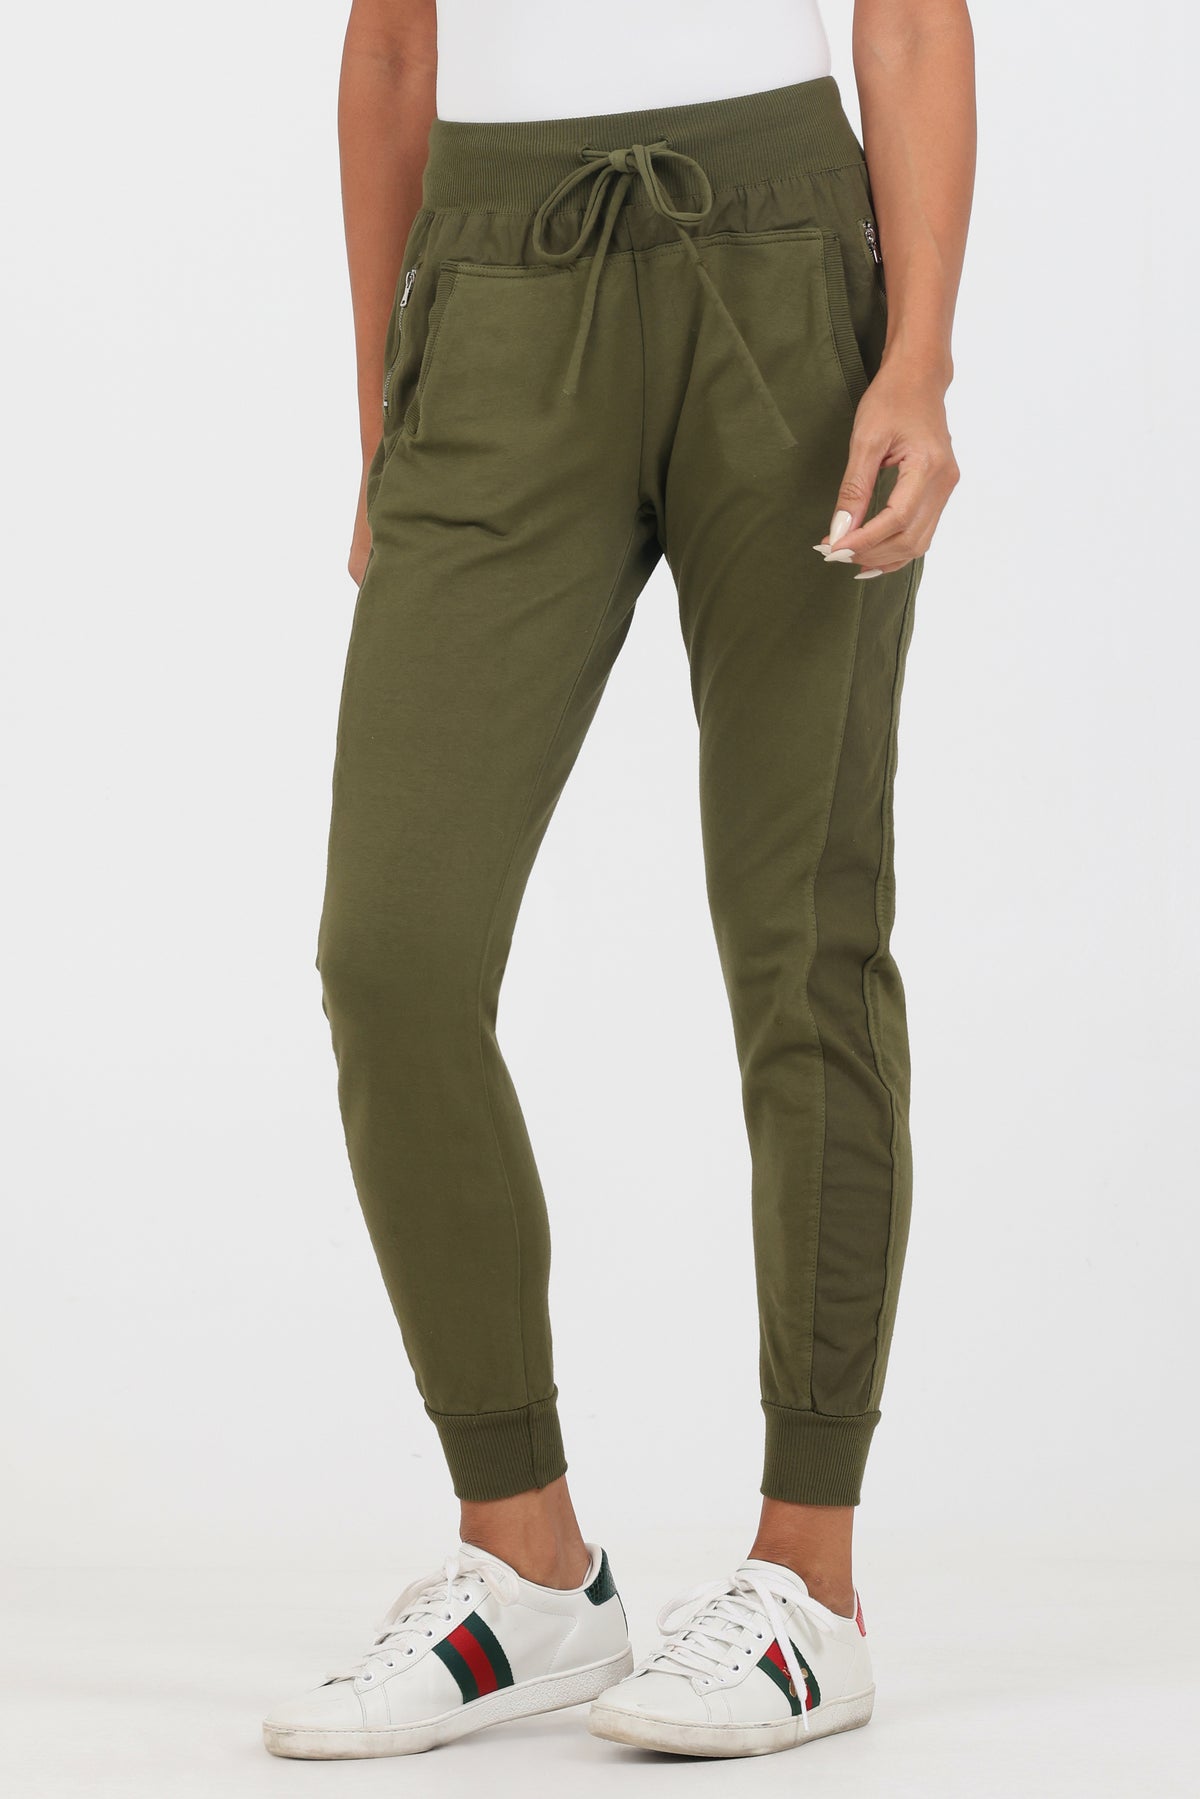 The Ultimate Jogger Olive